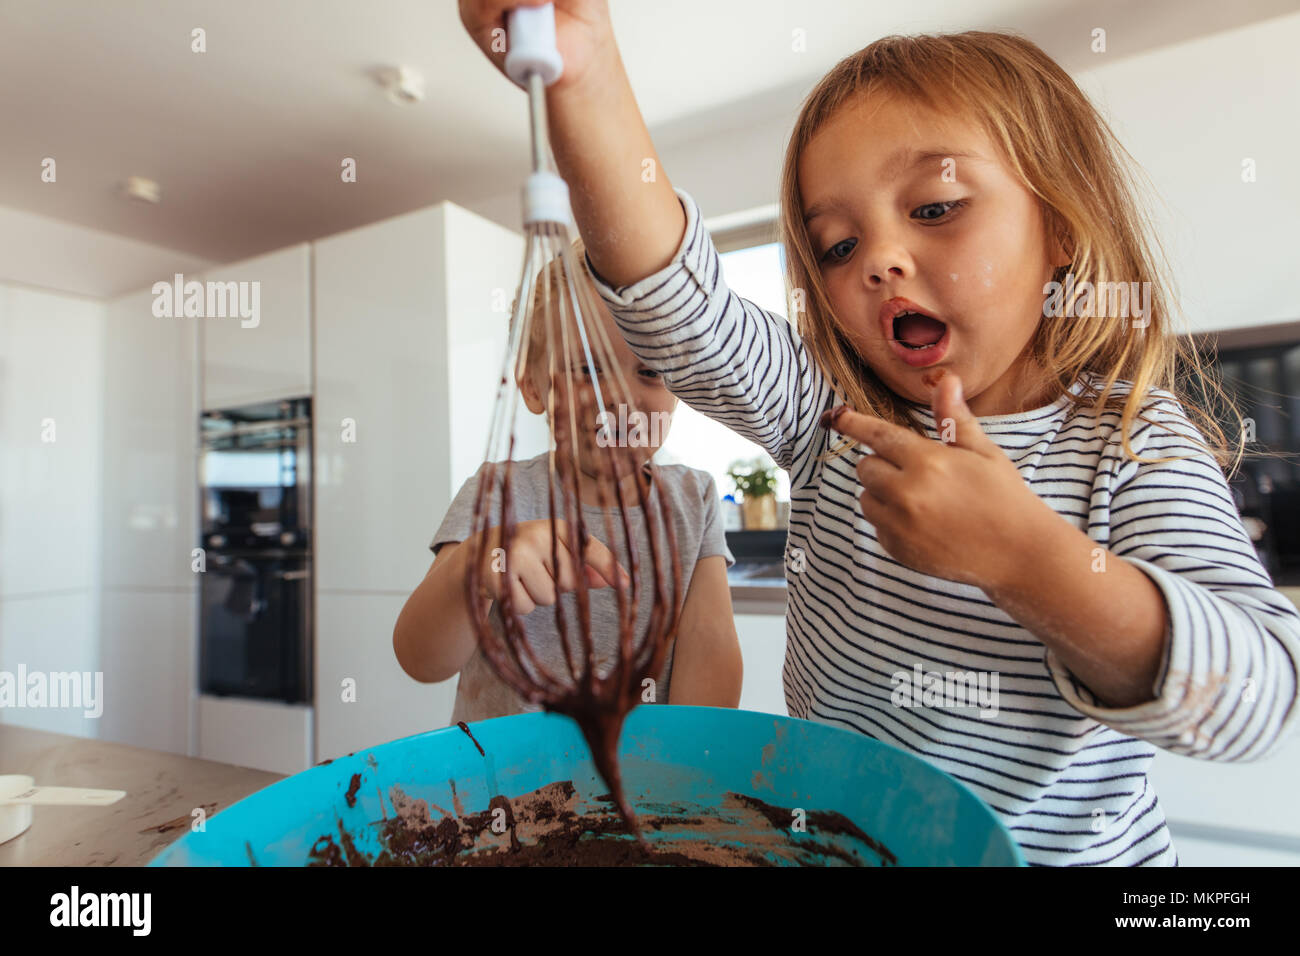 Young girl licking batter from bowl. Little girl mixing the batter with whisk in kitchen. Stock Photo